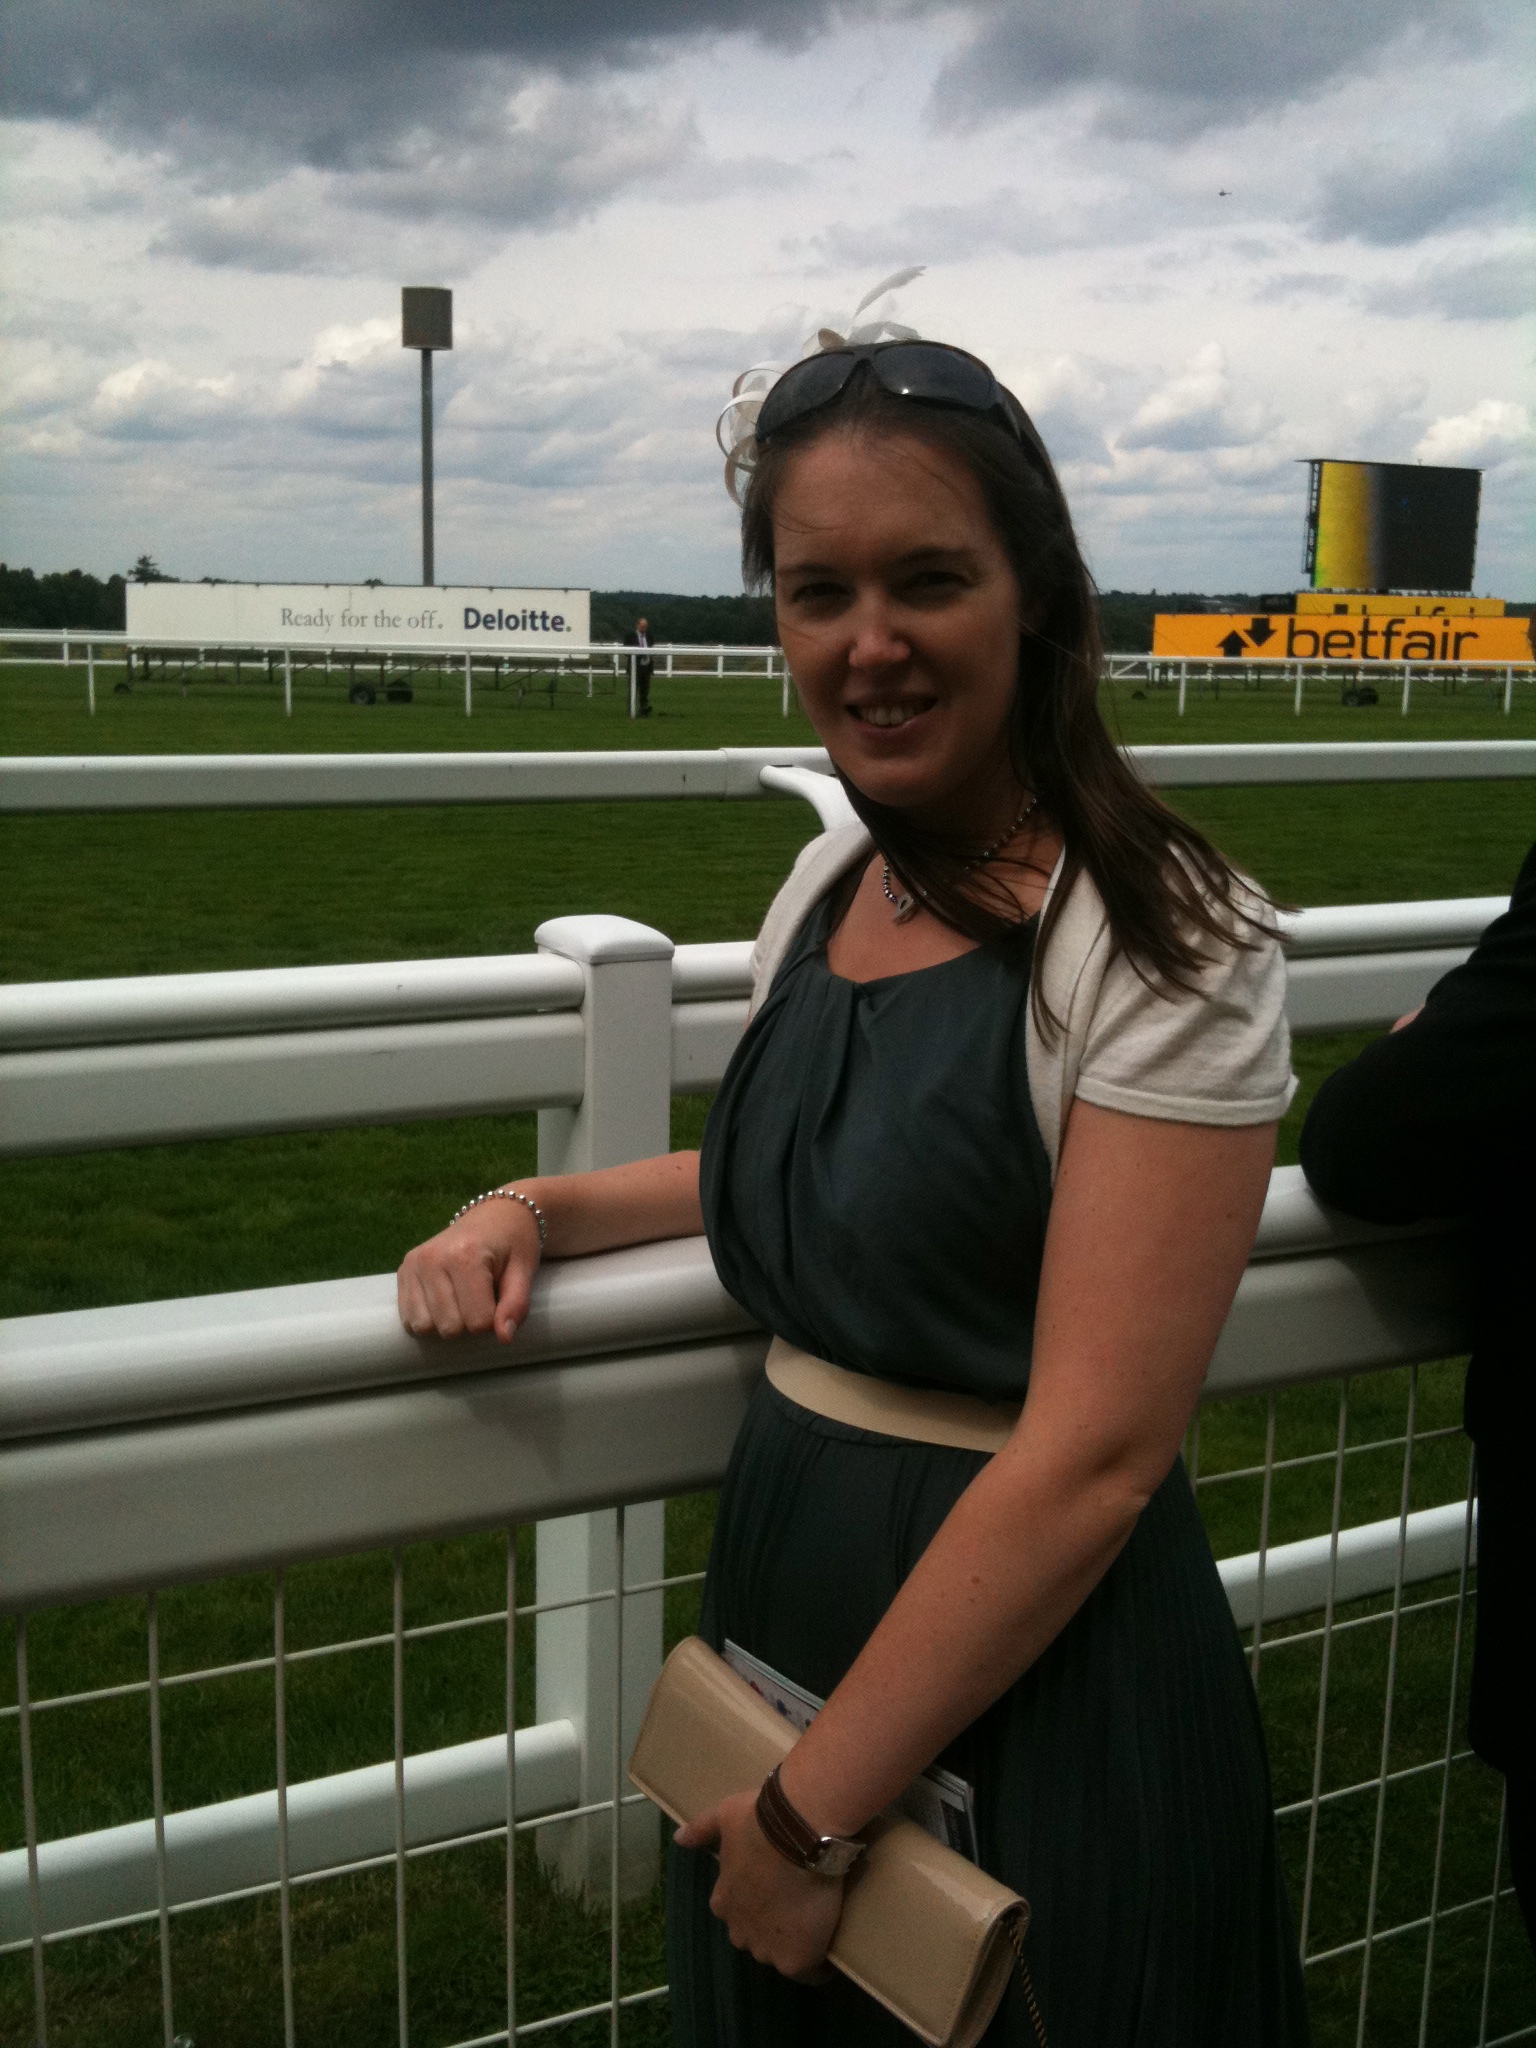 Lovely day at the races